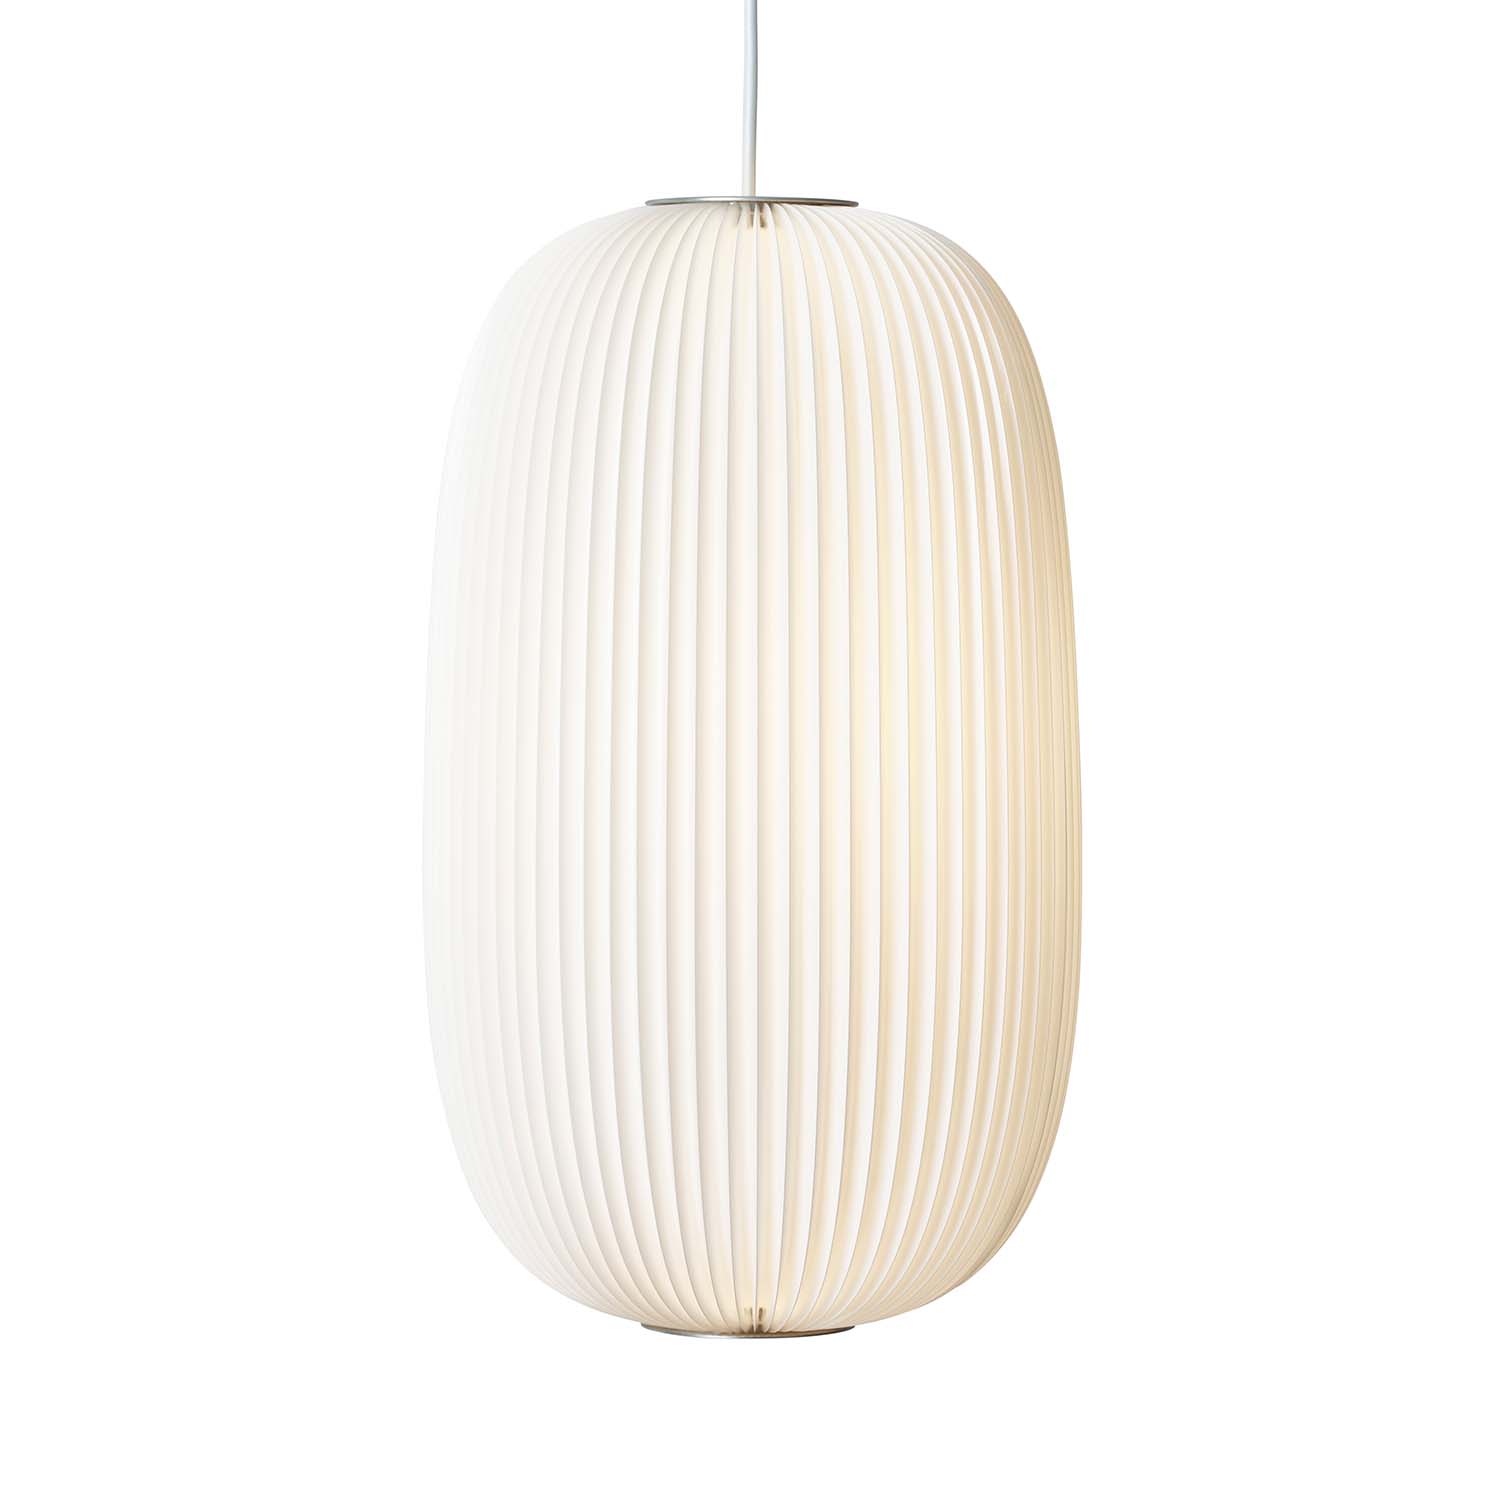 LAMELLA 2 - Pleated paper hanging lamp, handcrafted